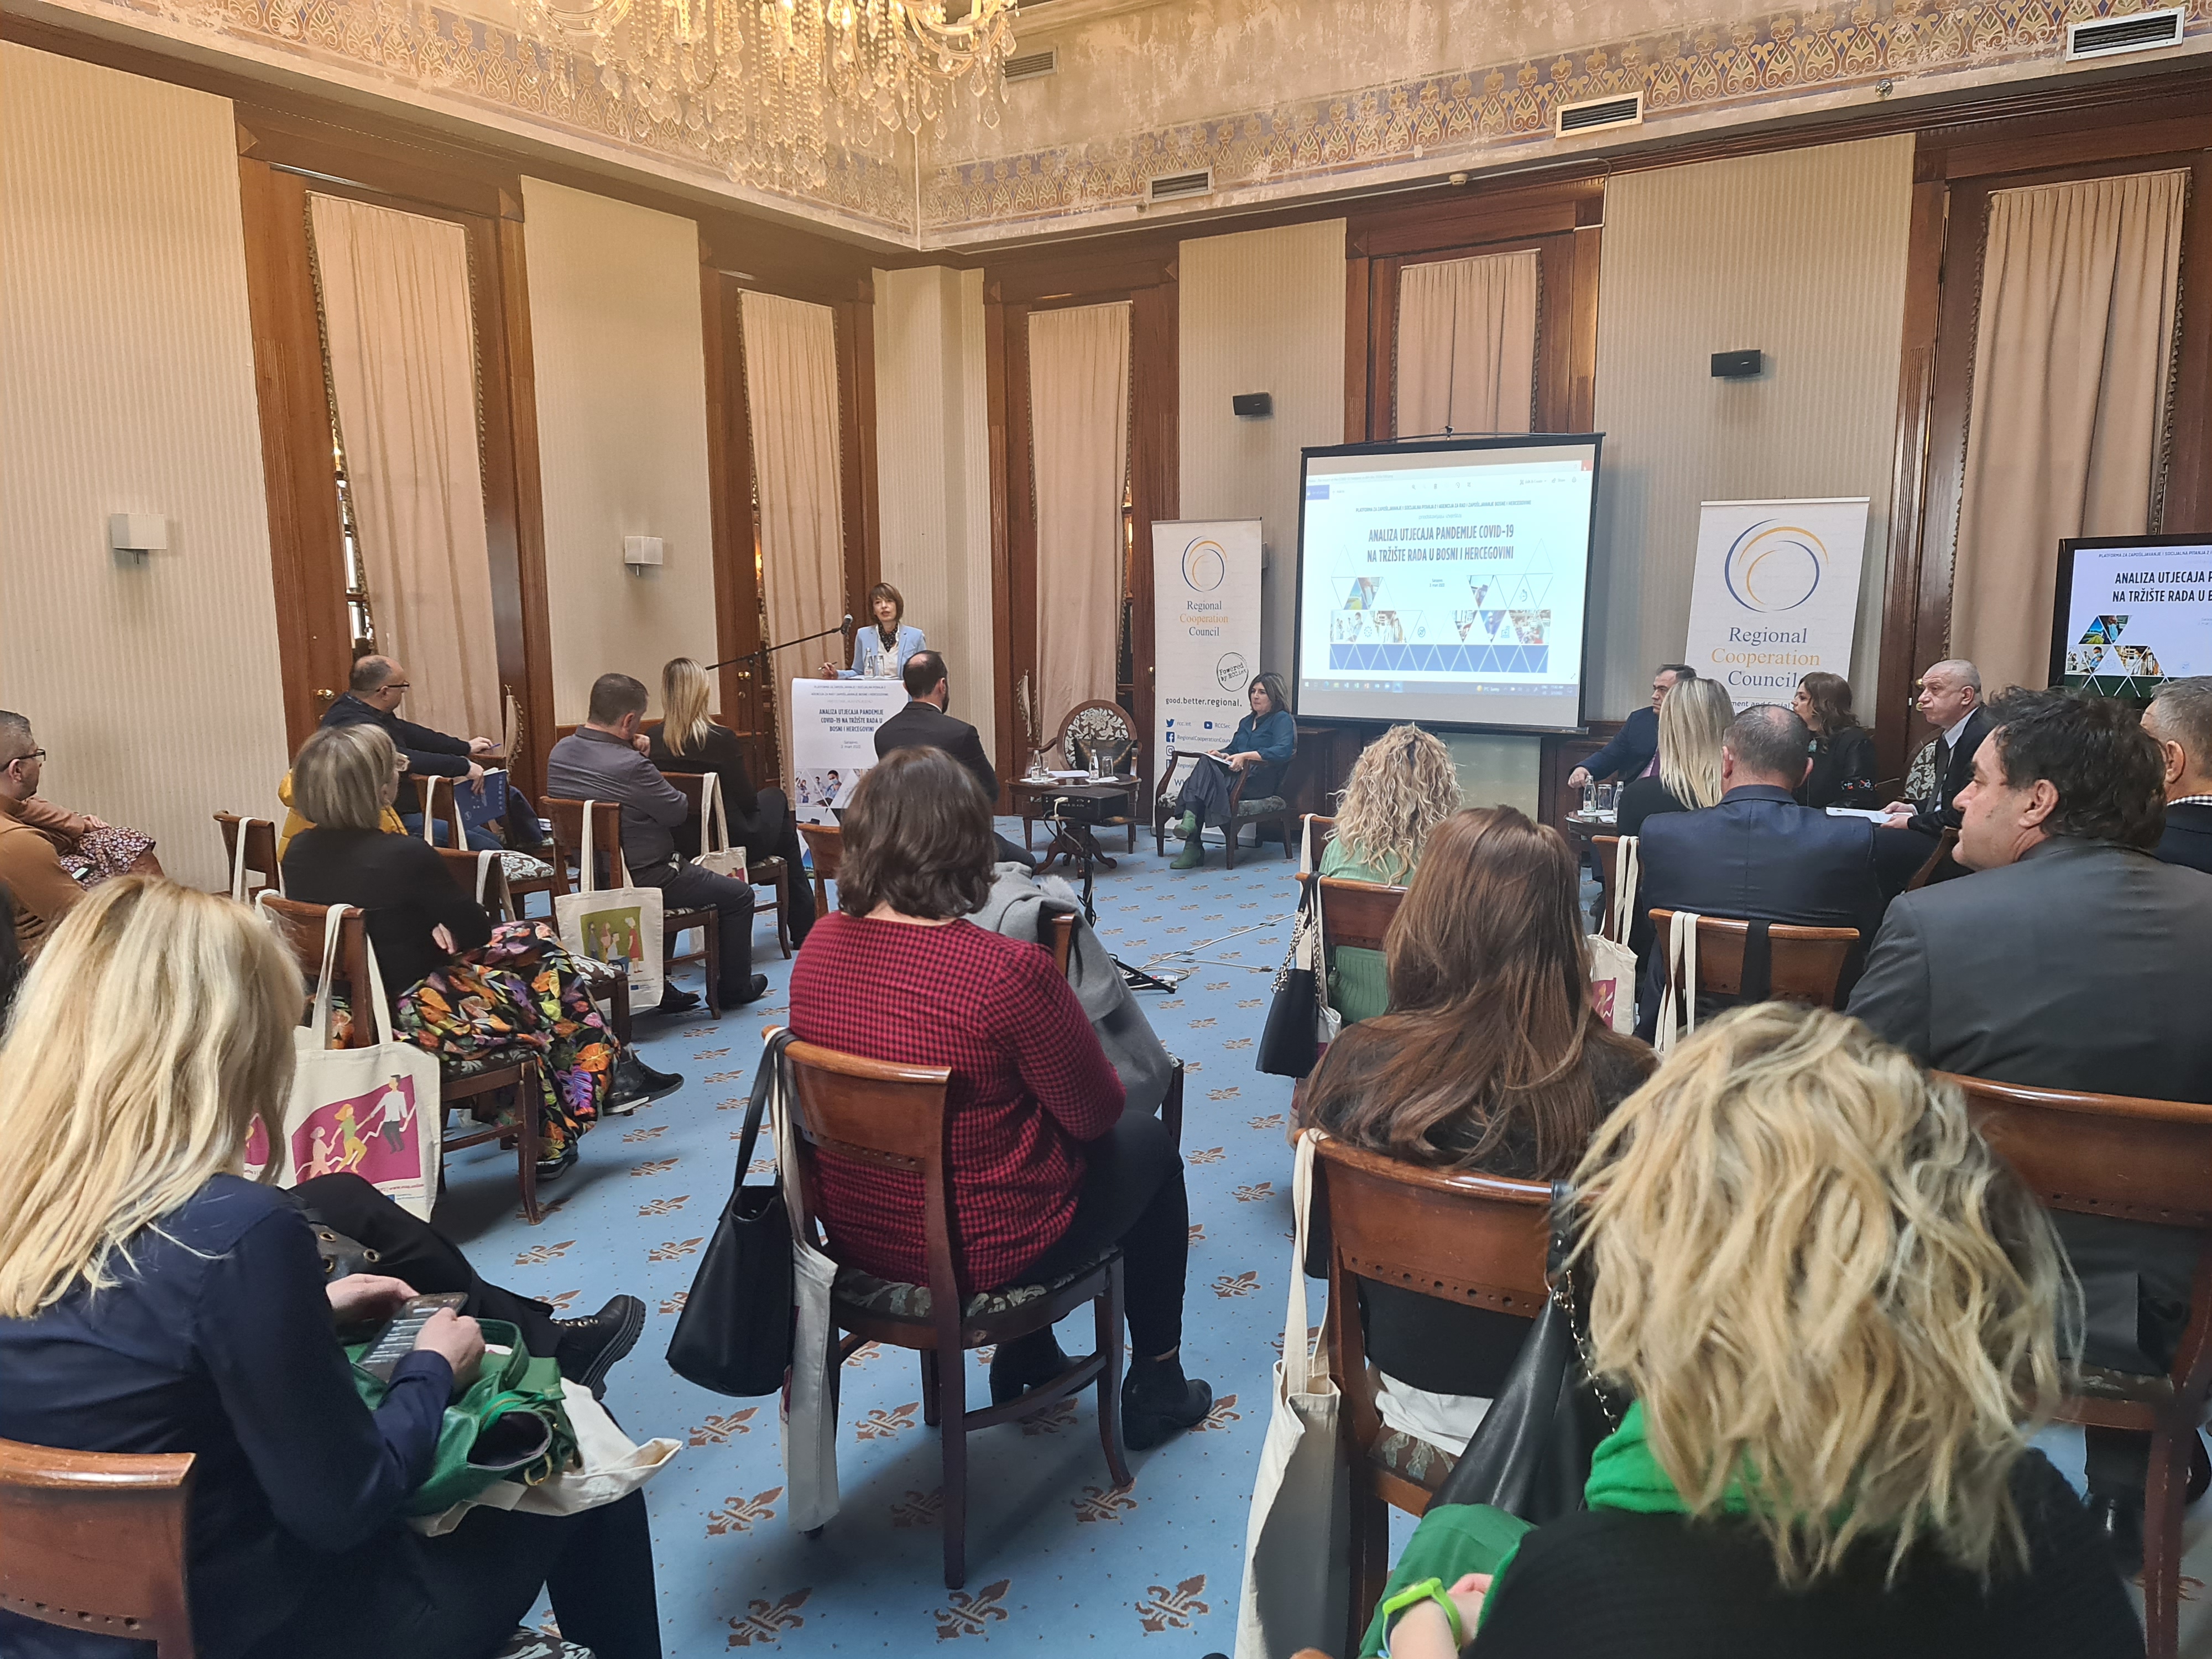 RCC ESAP 2 and Labour and Employment Agency of Bosnia and Herzegovina jointly organised presentation of report on effects of COVID-19 pandemic on labour market, Sarajevo, 3 March 2022 (Photo: RCC ESAP 2) 